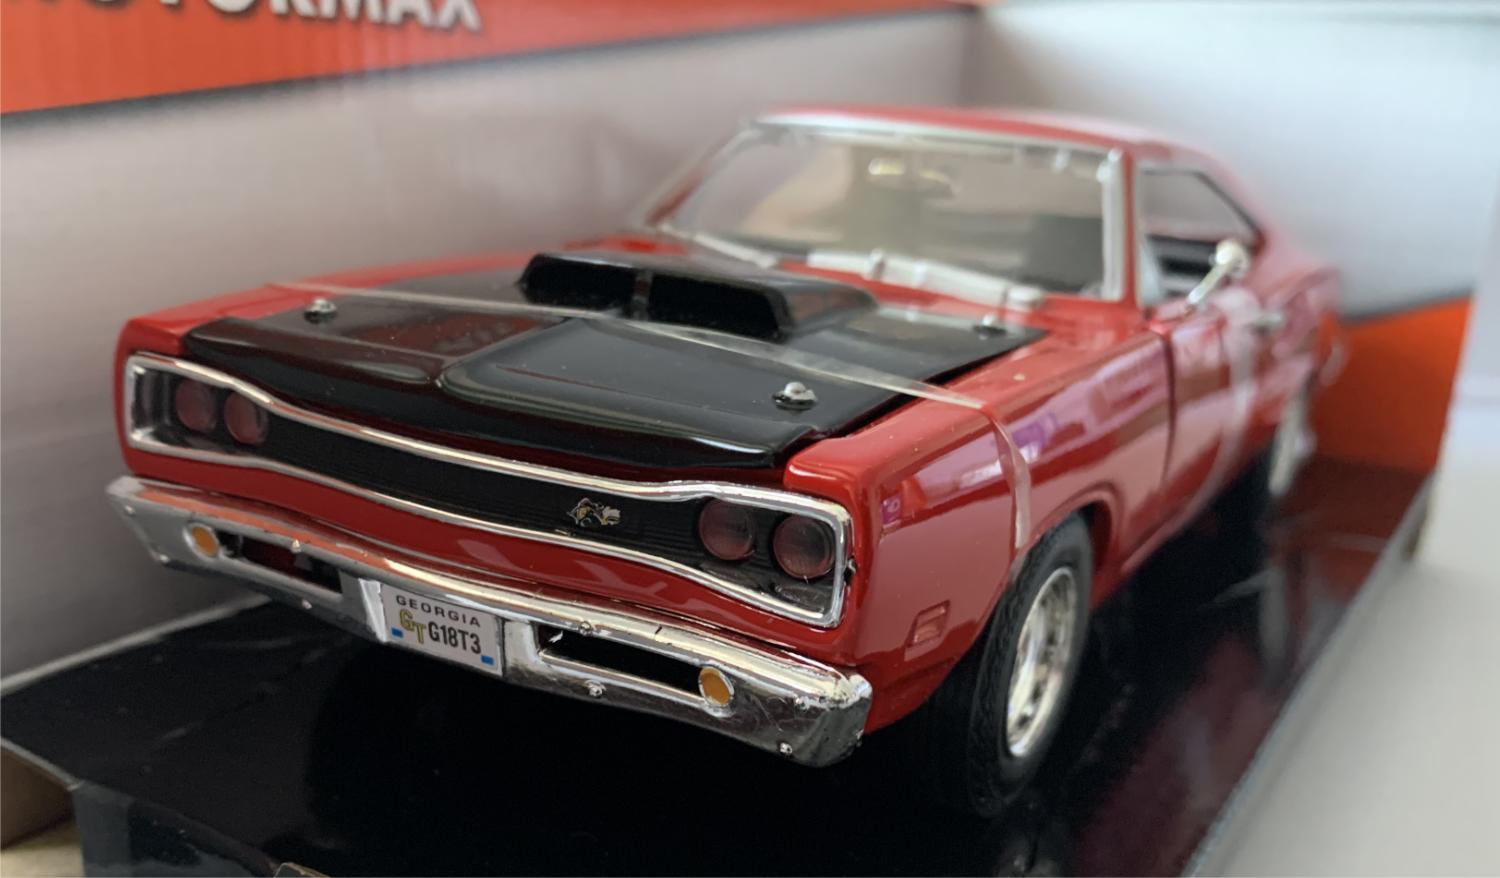 Dodge Coronet Super Bee 1969, red with black bonnet, 1:24 scale model from Motormax